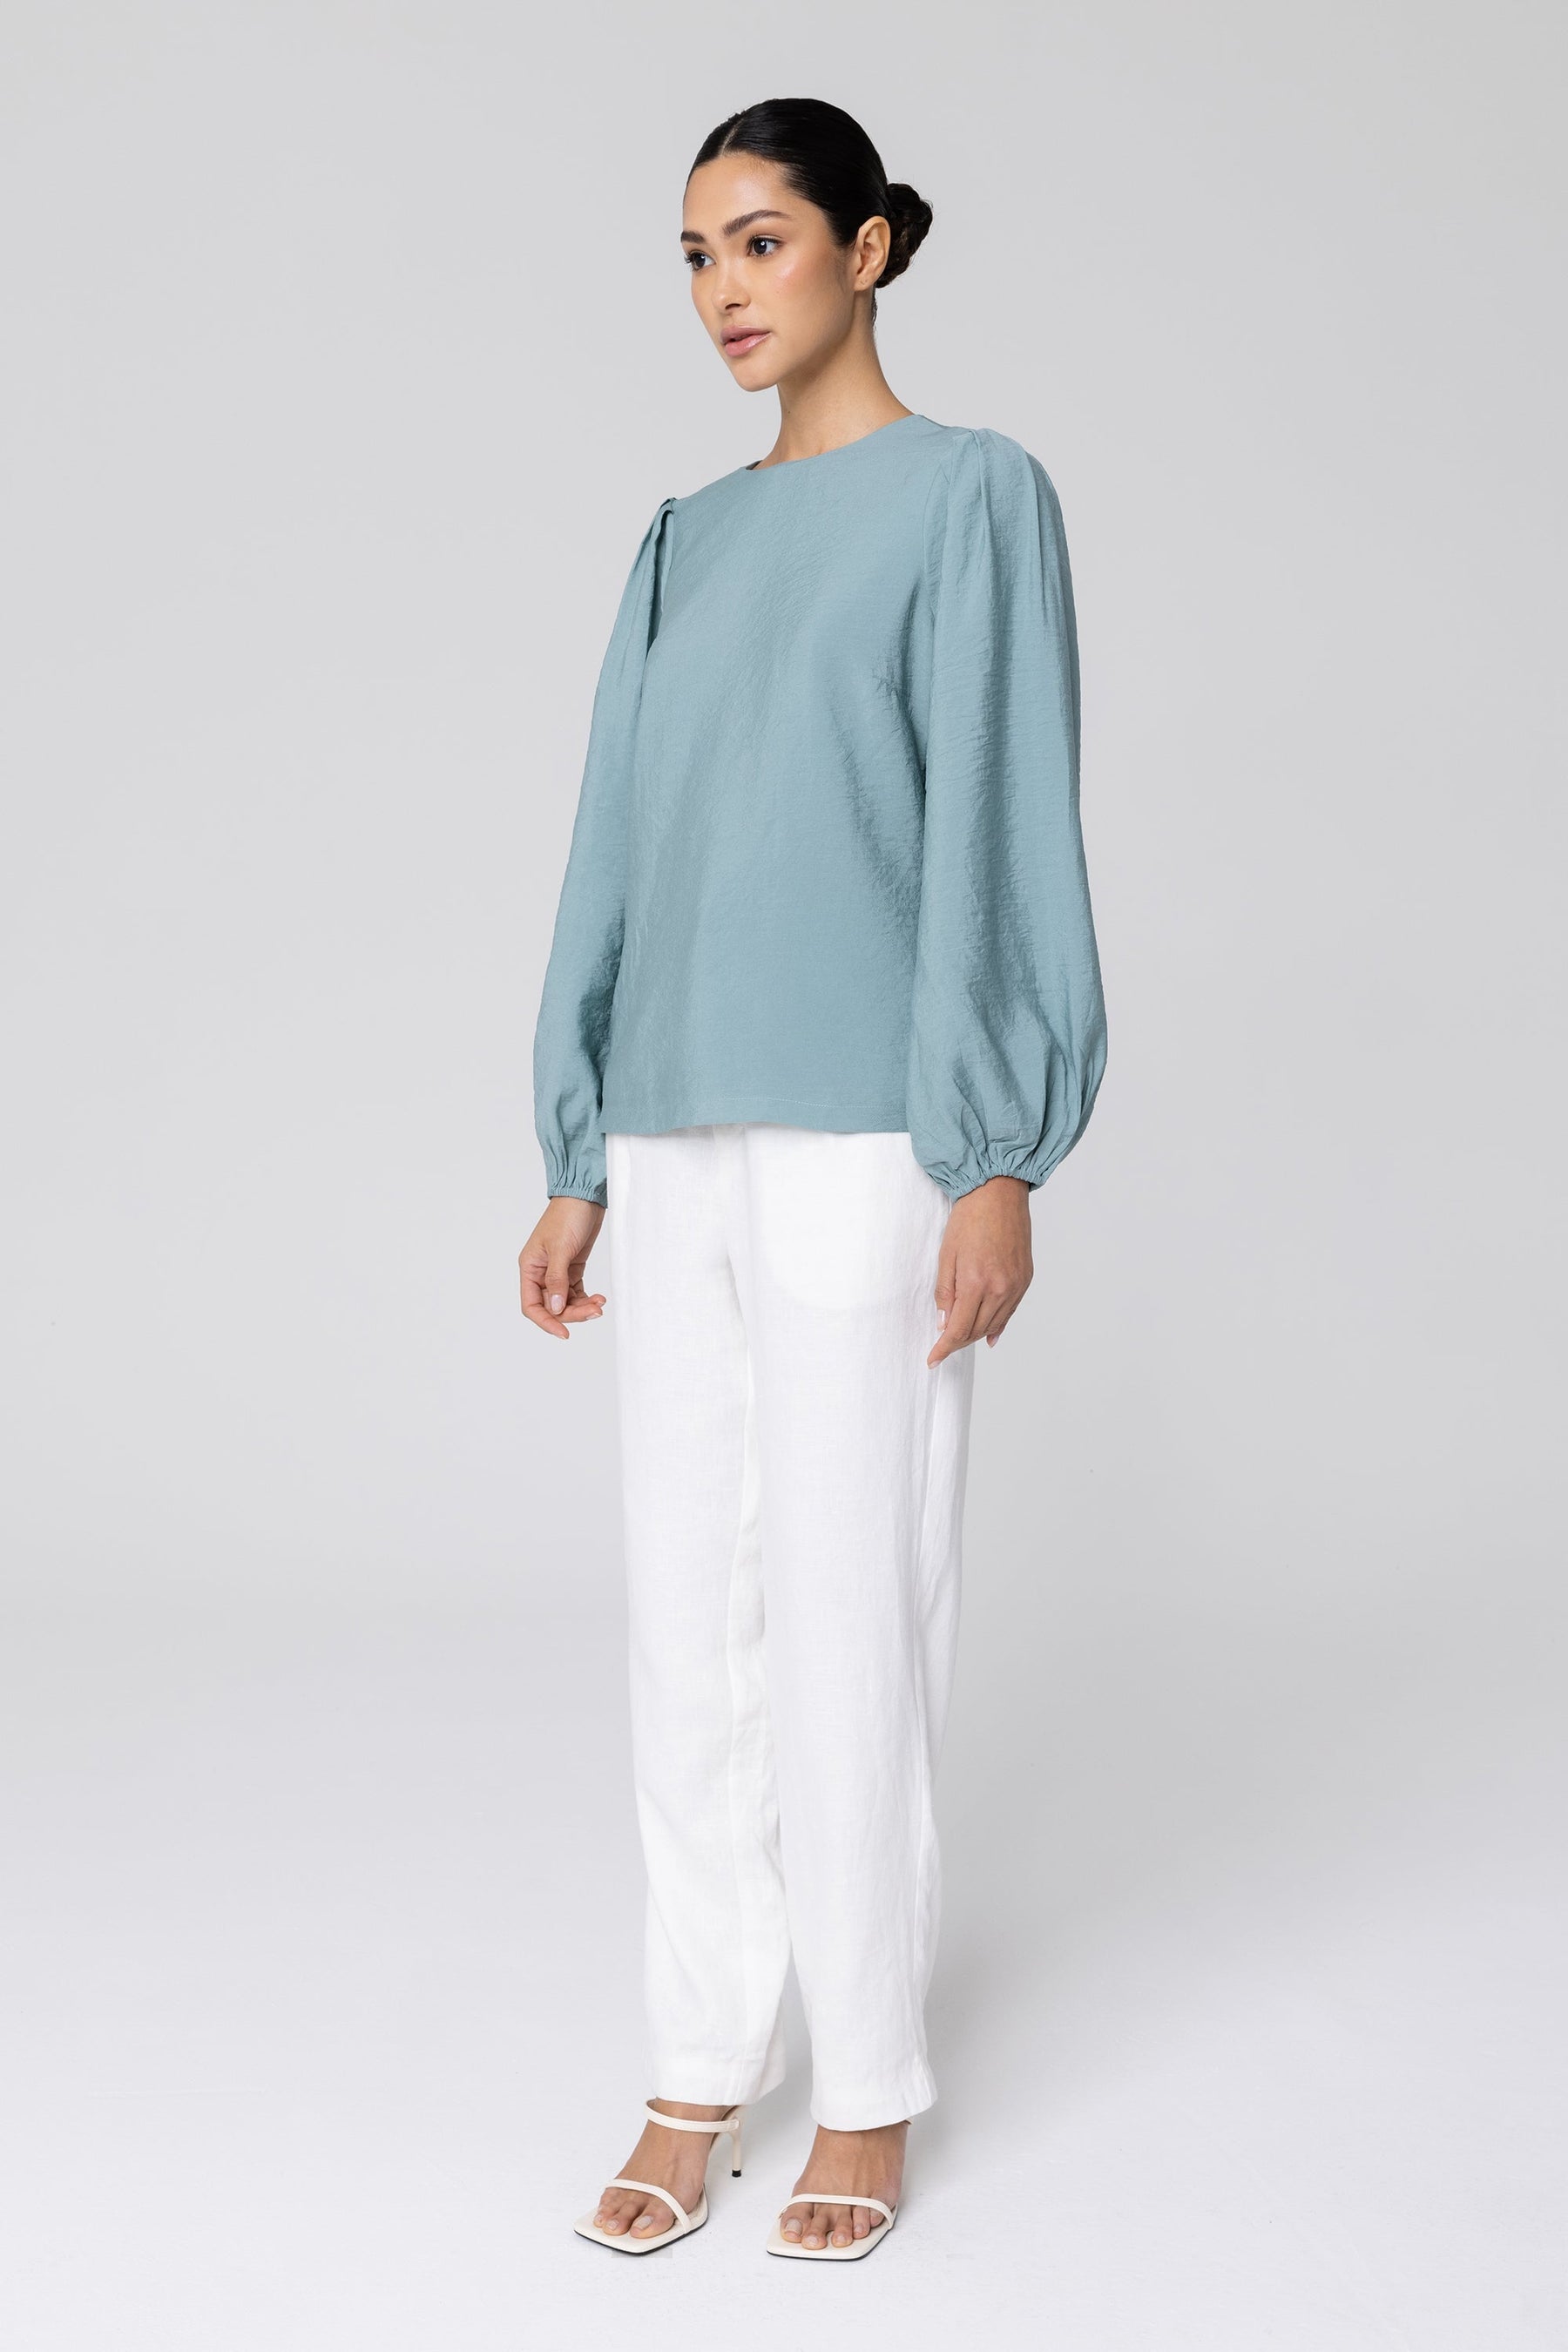 Lora Balloon Sleeve Top - Loden Frost Veiled Collection 